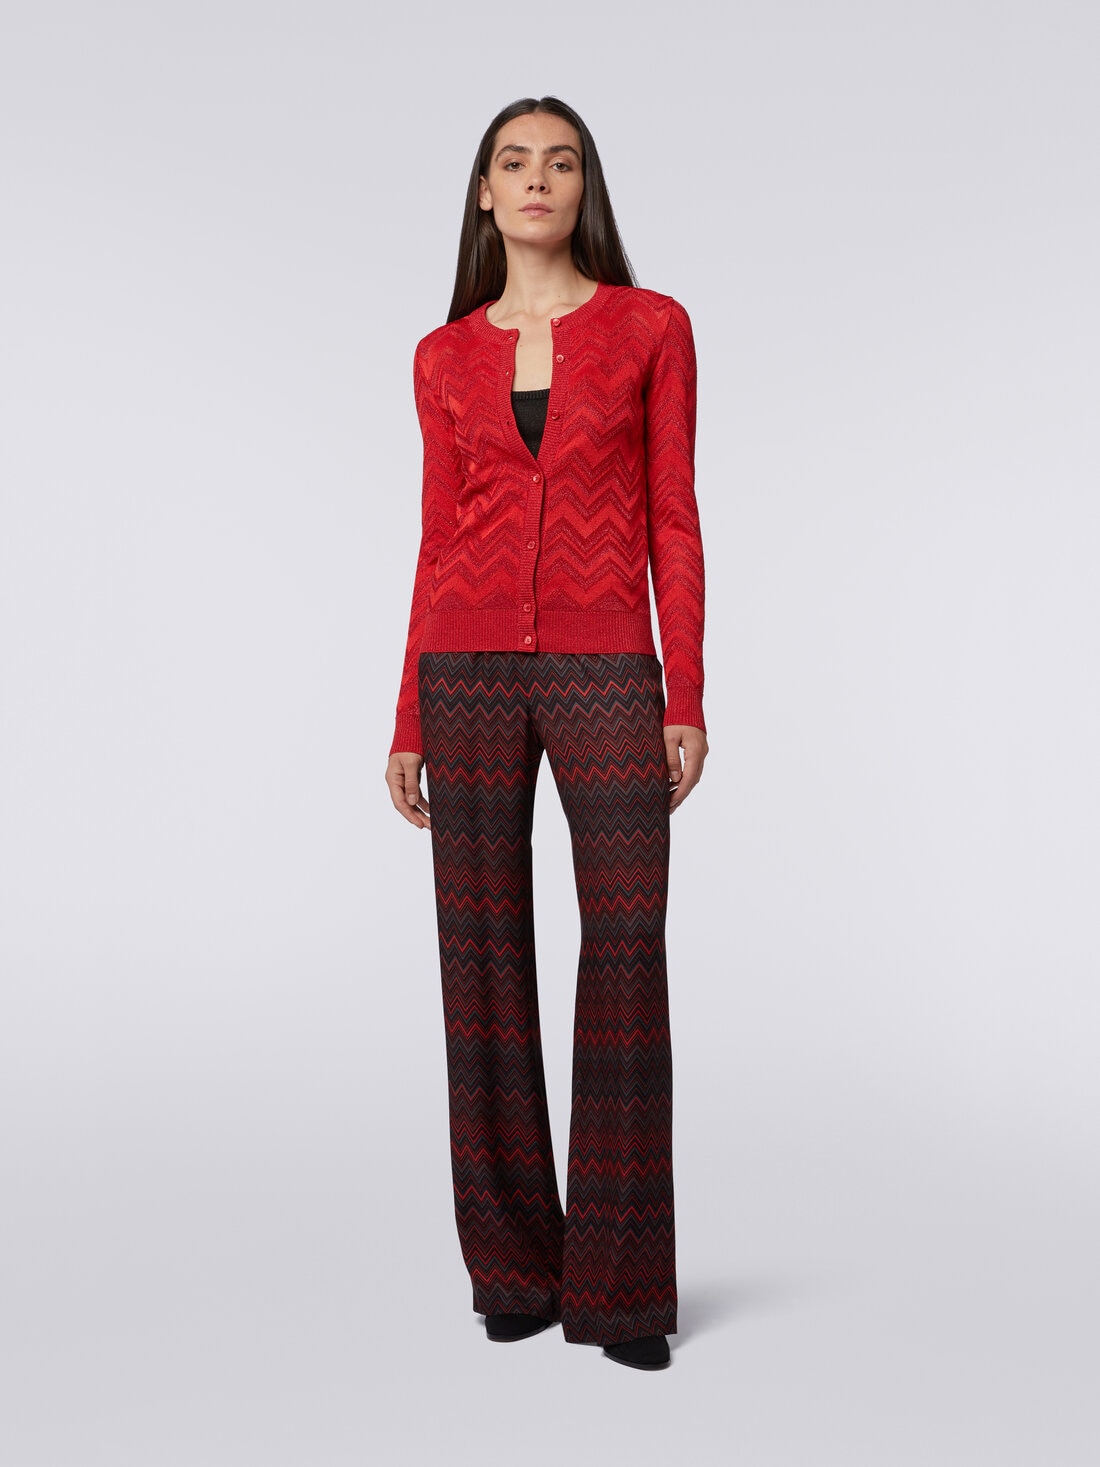 Cardigan in tonal zigzag knit with lurex, Red  - DS24SM0SBK034J81756 - 1